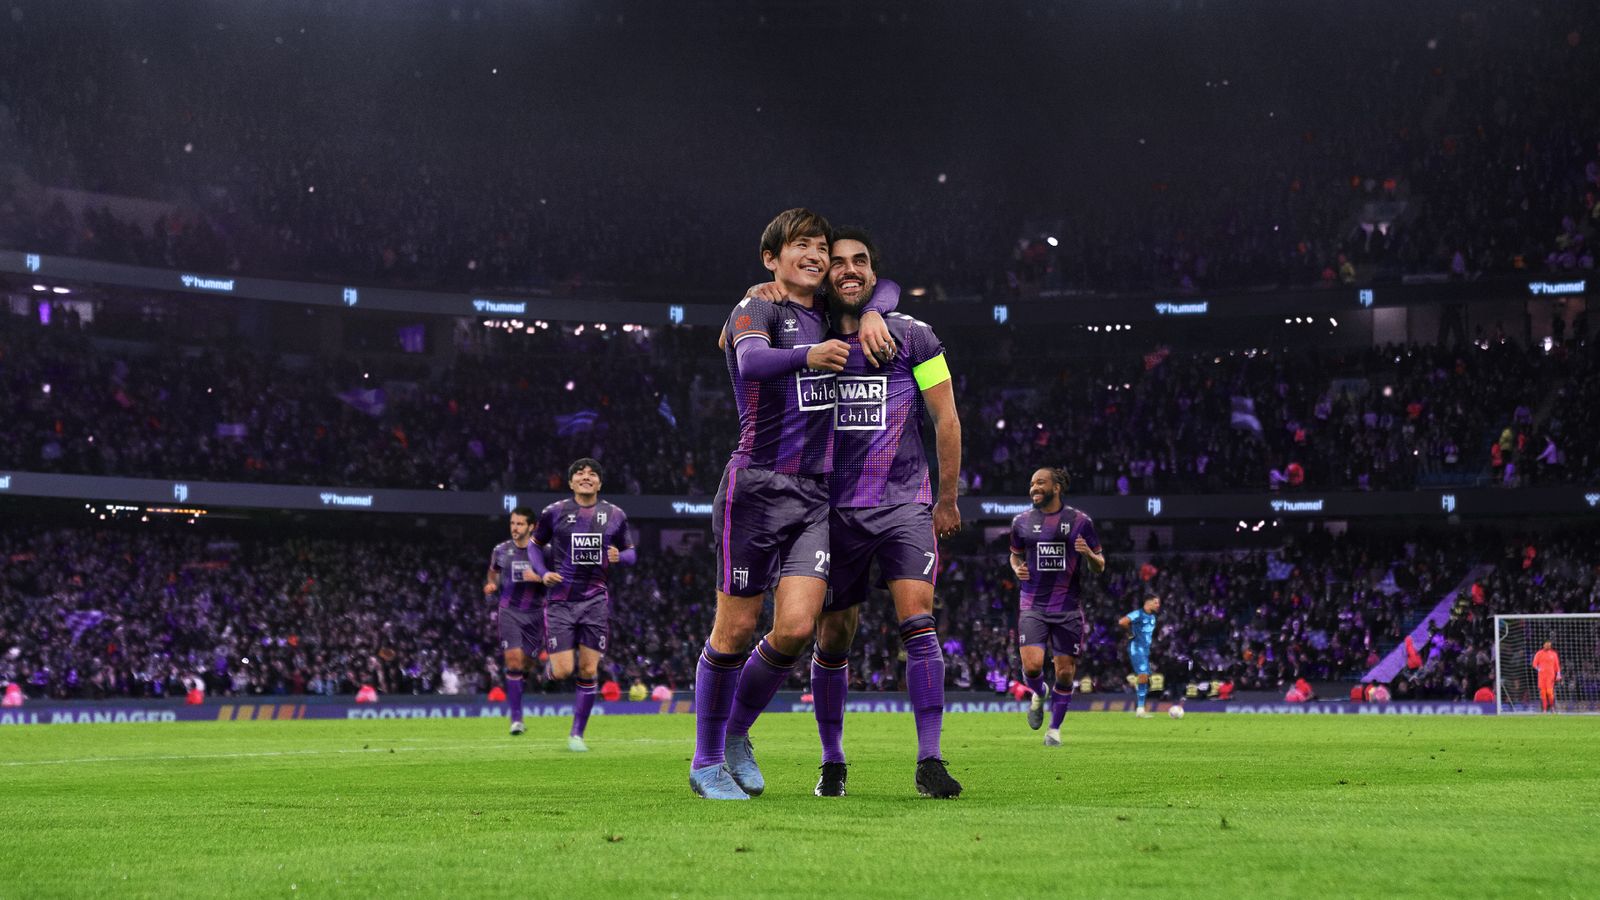 Football Manager 2024 Hero Key Art with two players in purple kits celebrating together in a stadium.